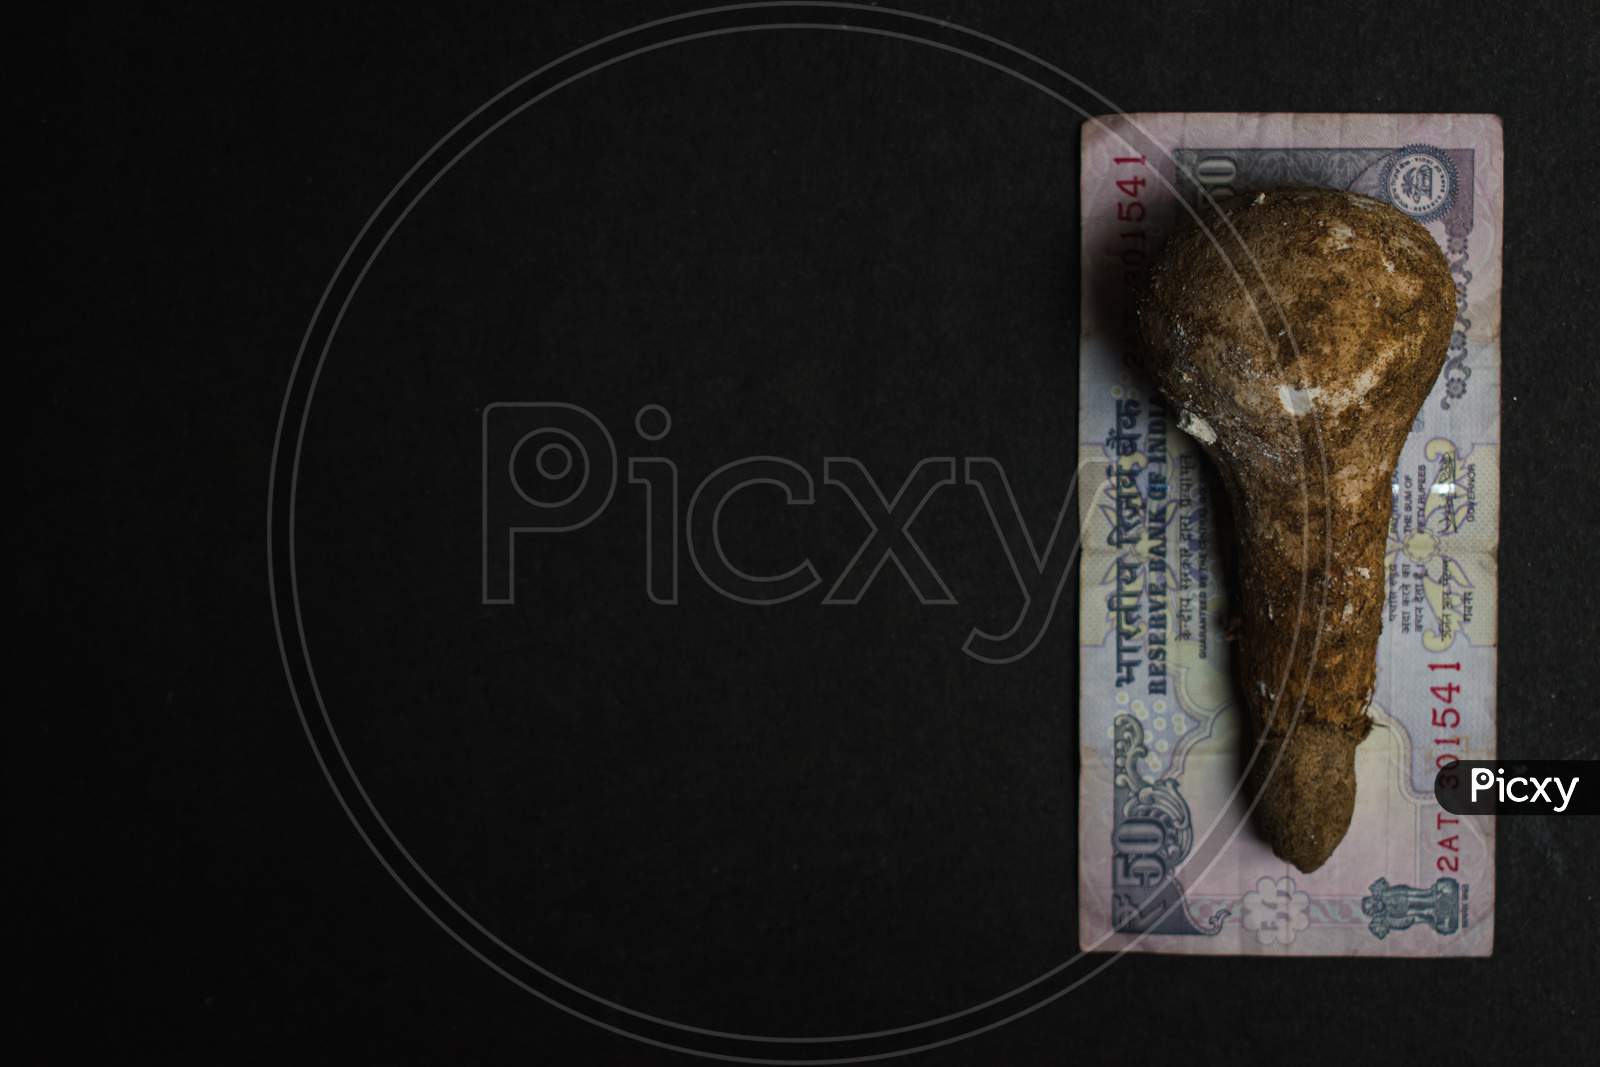 mushroom placed on indian currency on a black textured background, conceptual image, money concept